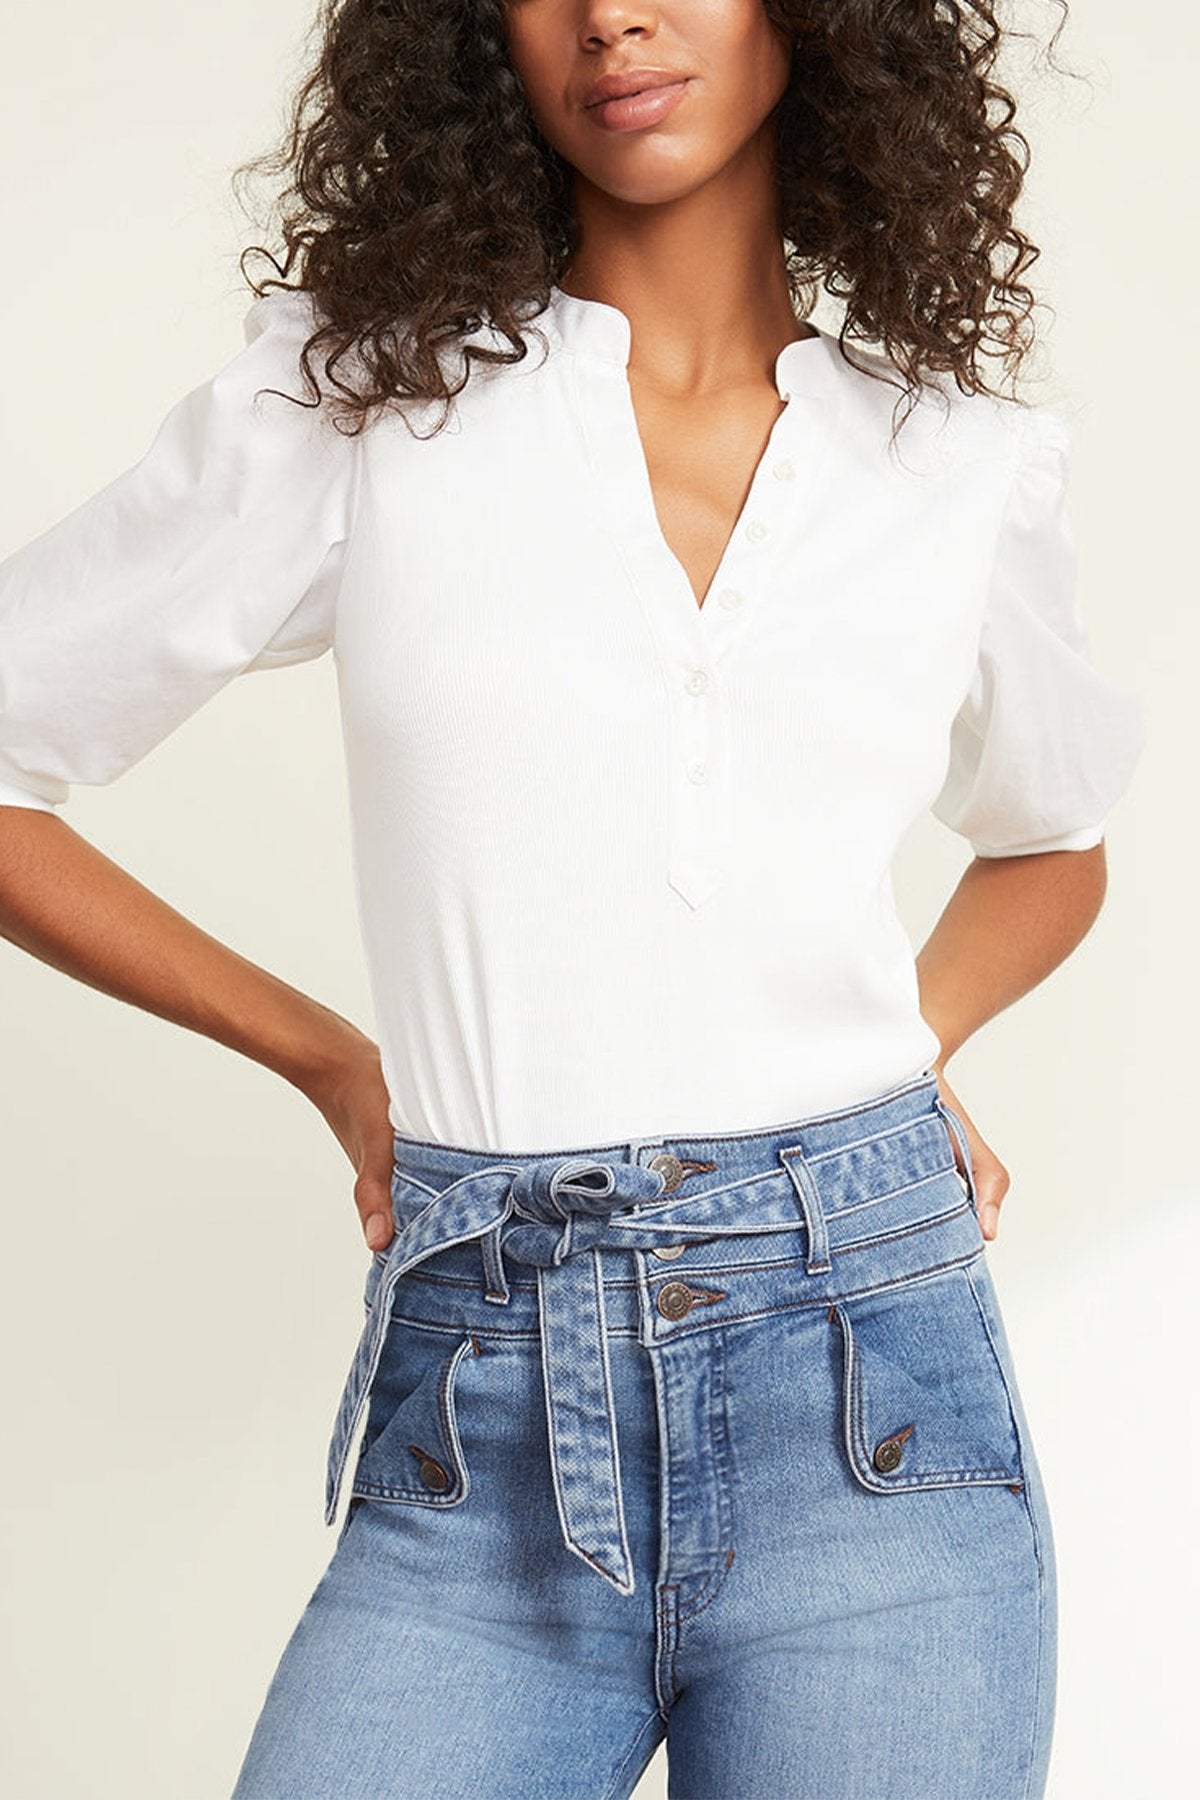 Coralee Puffed-Sleeve Top in White - shop-olivia.com